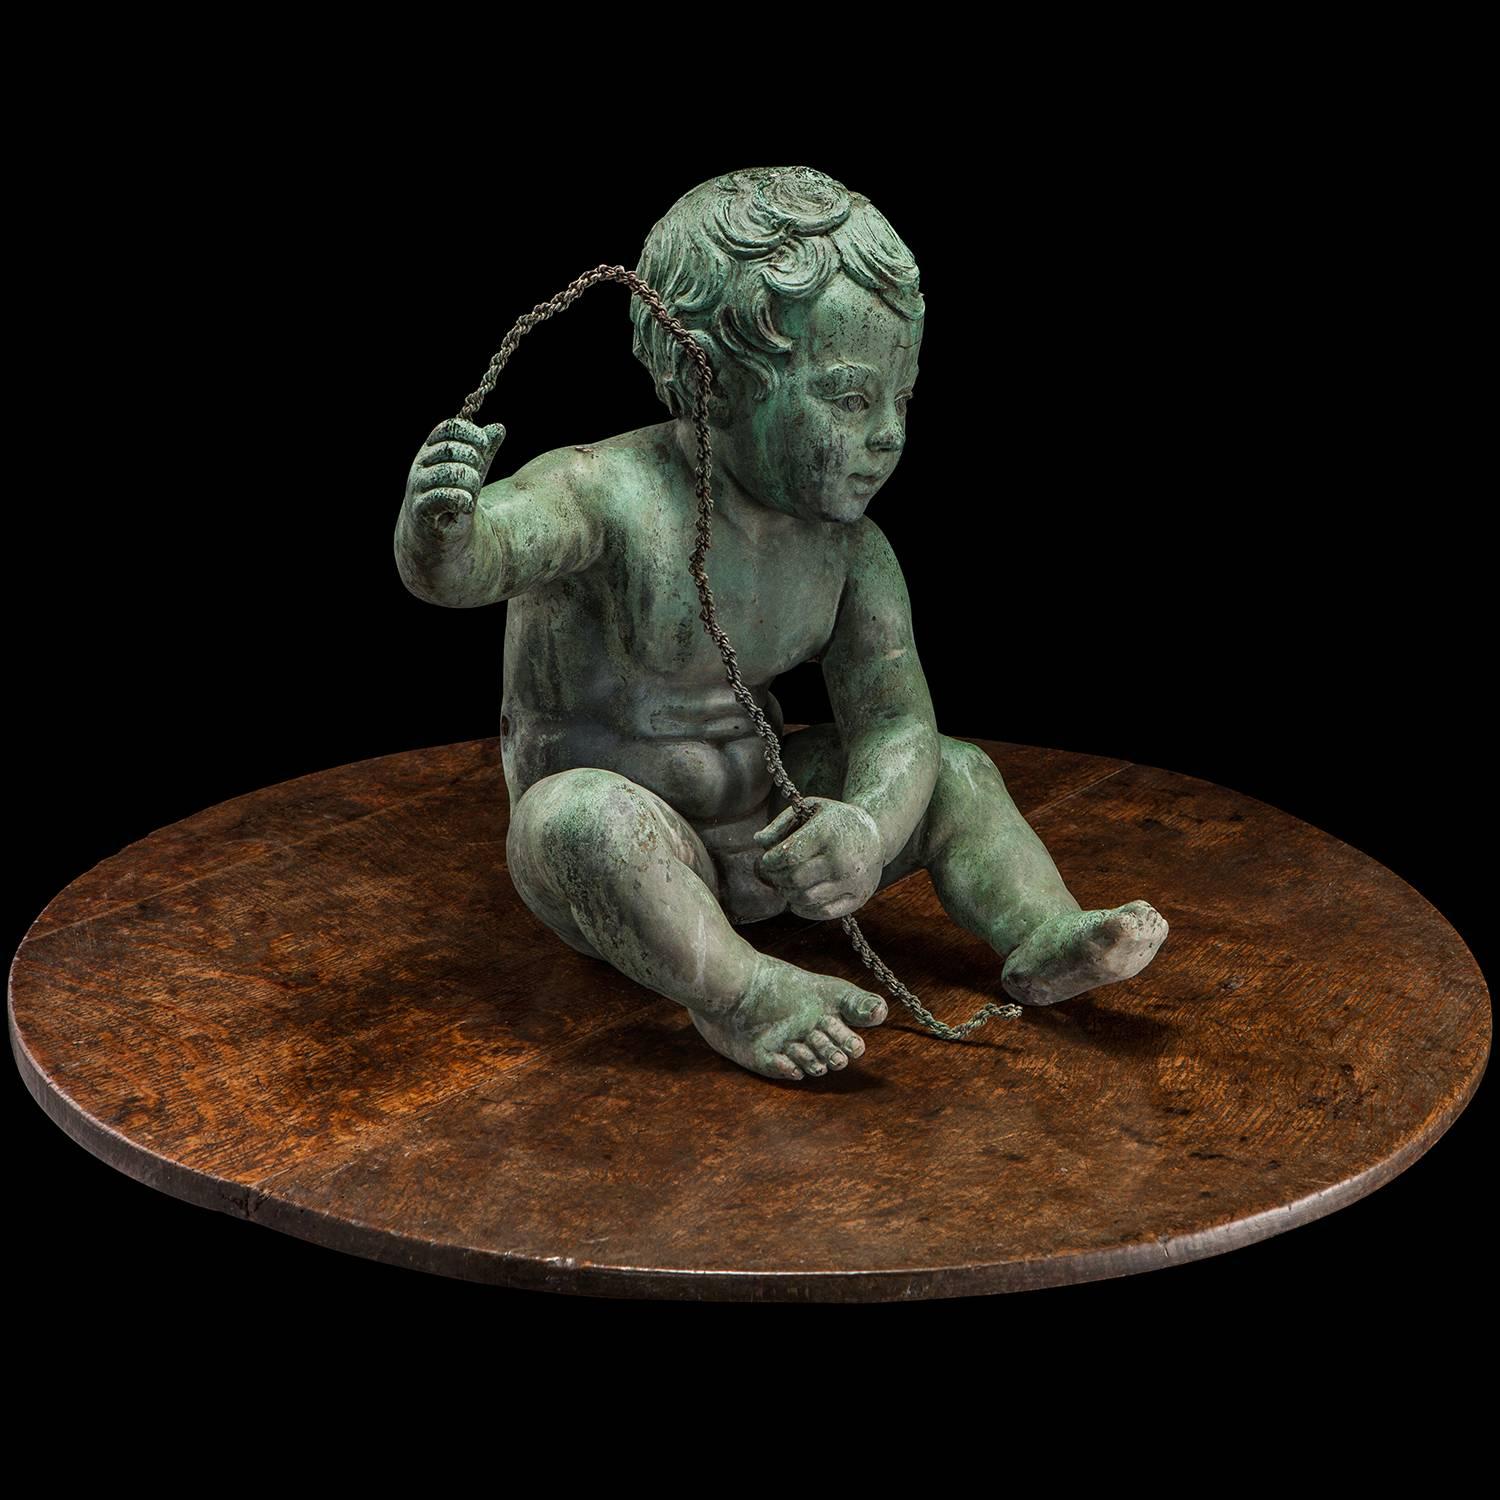 Wonderful cast bronze statue of a young boy, holding the remnants of a fishing line.